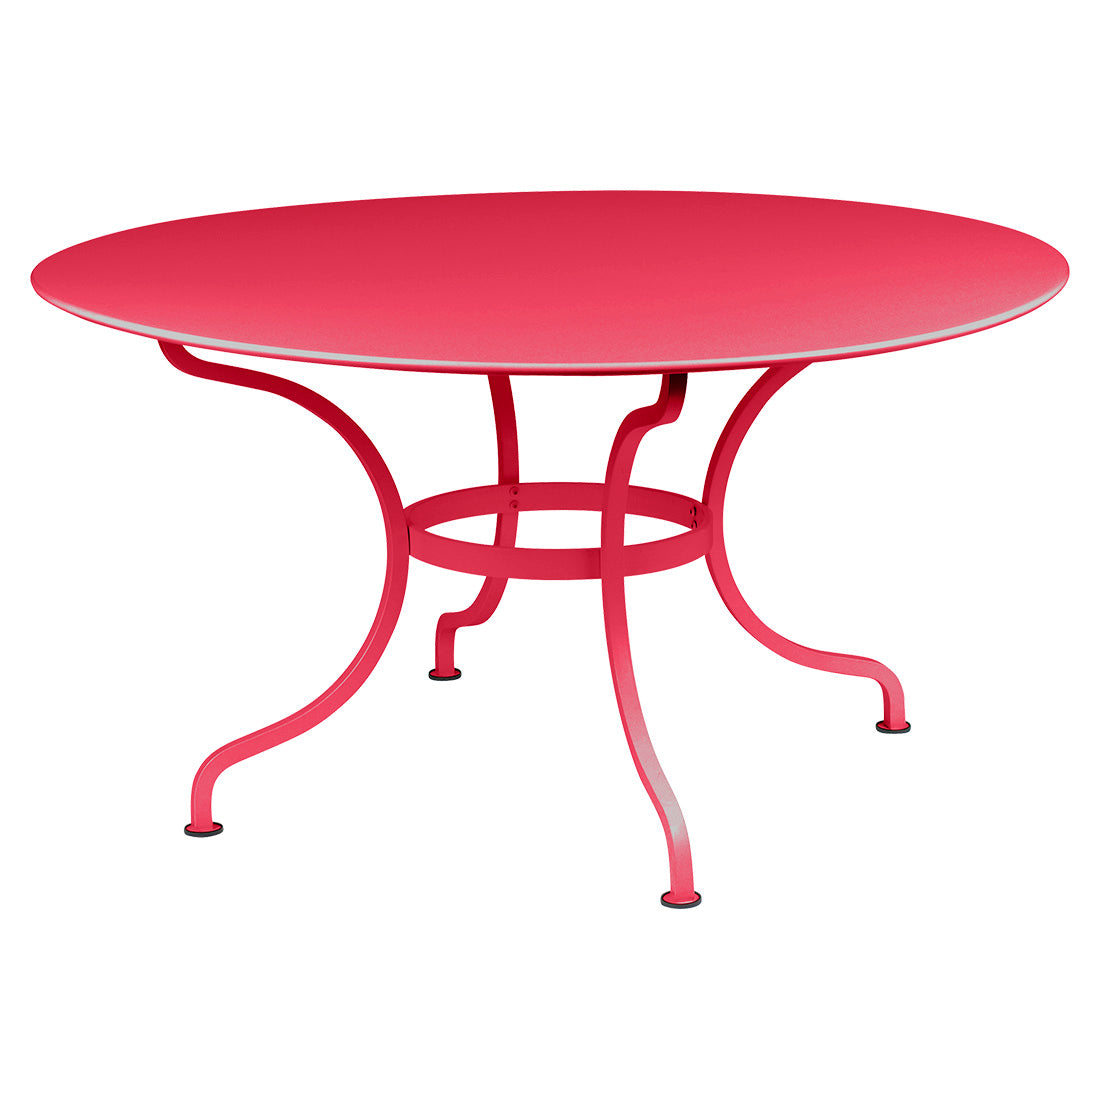 Fermob Romane Table 46 Inch Round Dining Table - bonmarche